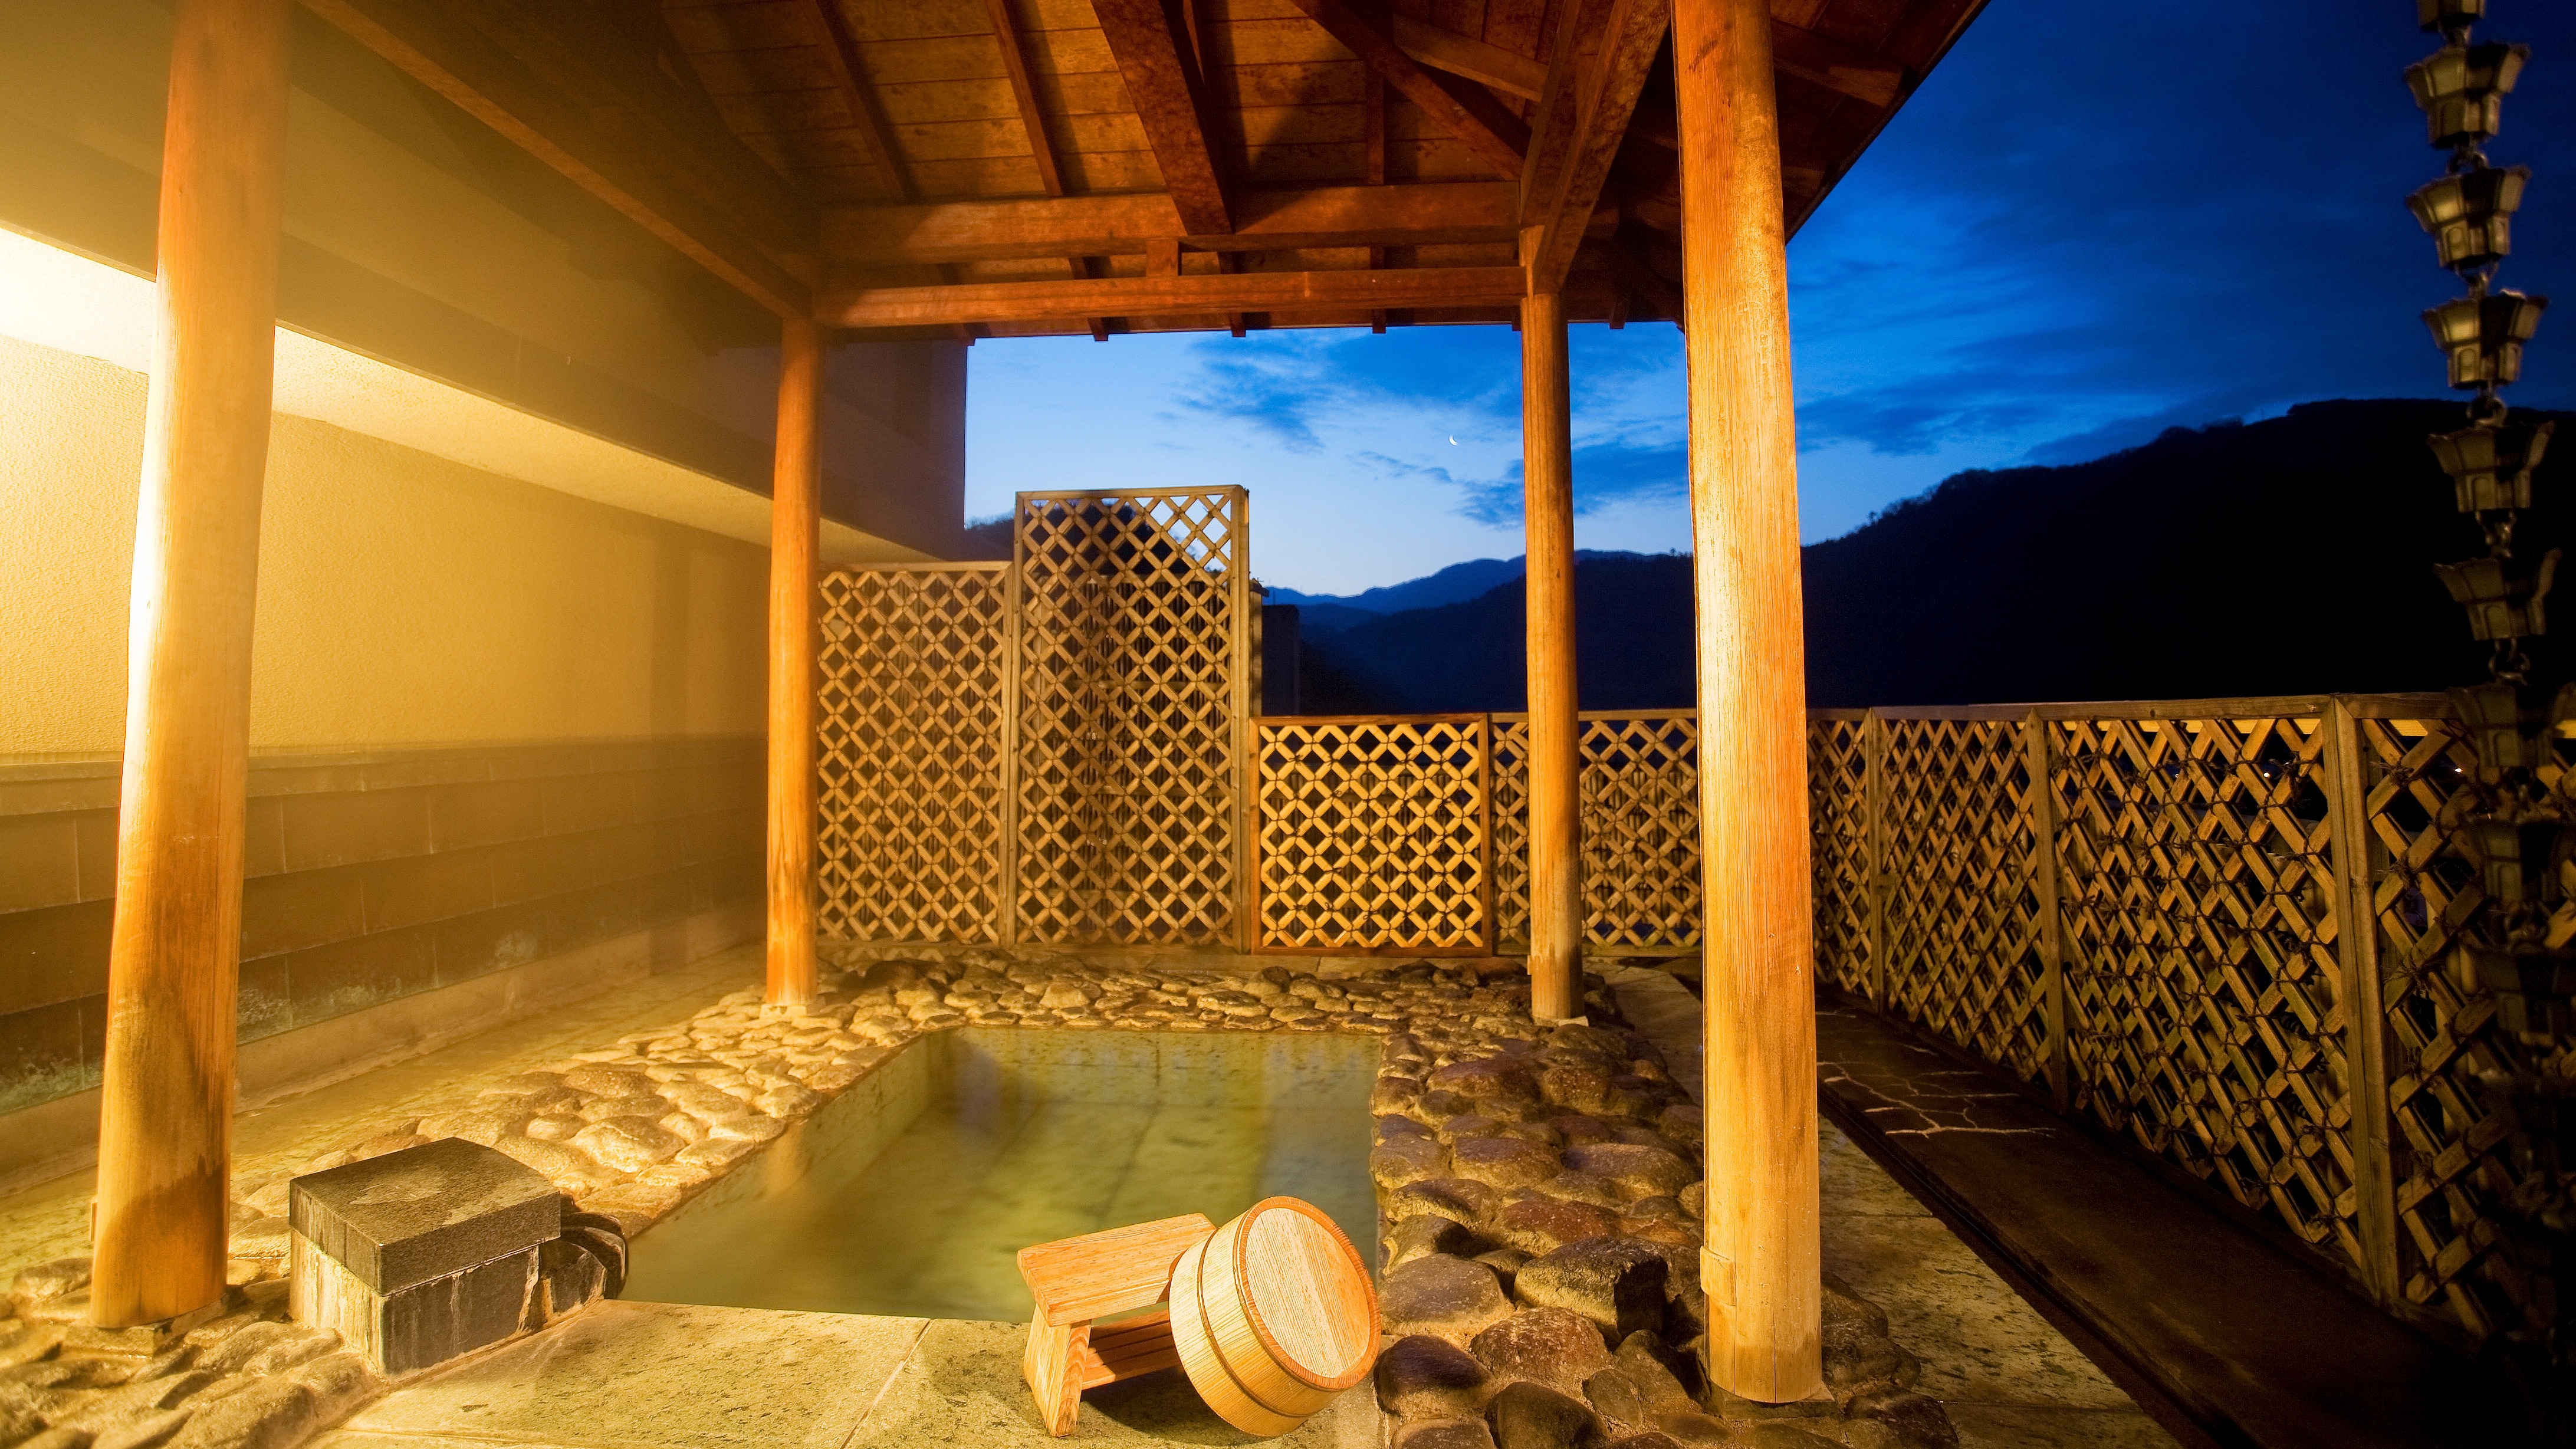 ■ Special room with open-air bath [Otoha]